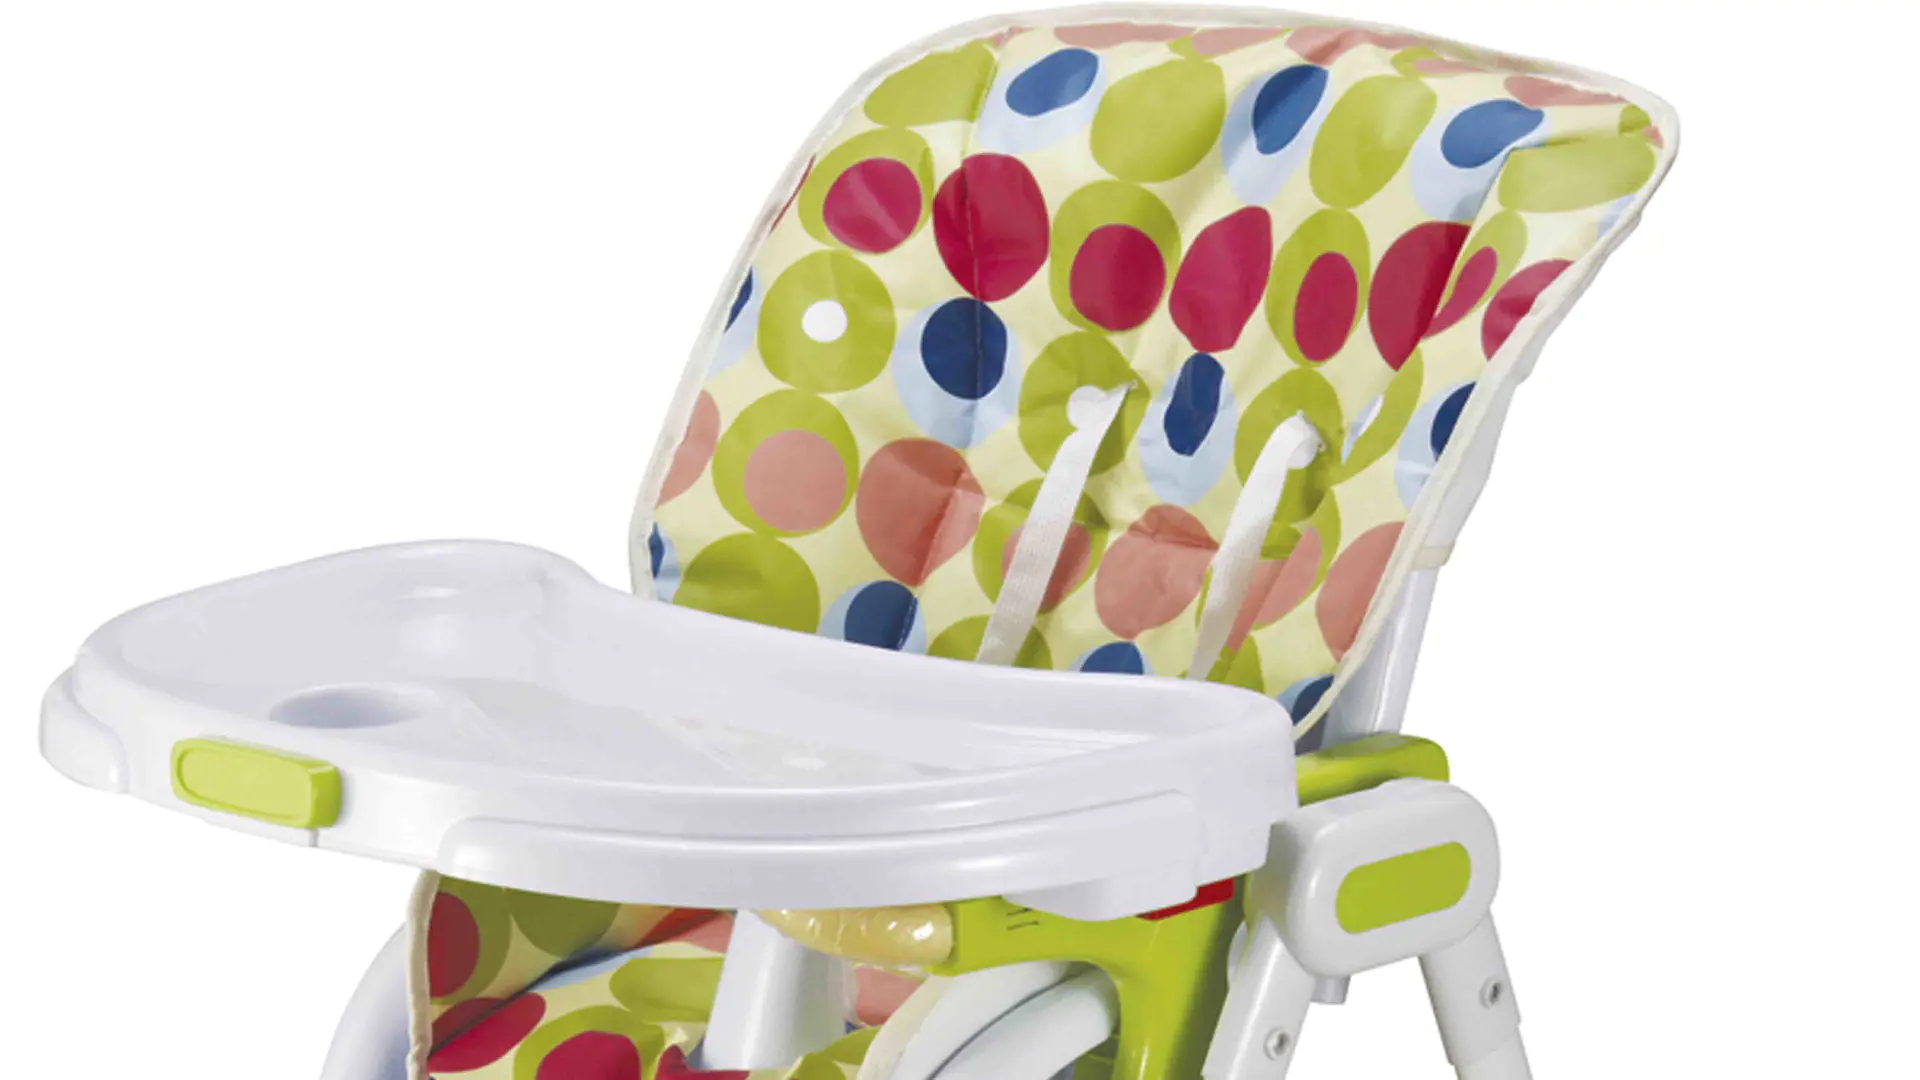 Aoqi foldable baby high chair manufacturer for livingroom